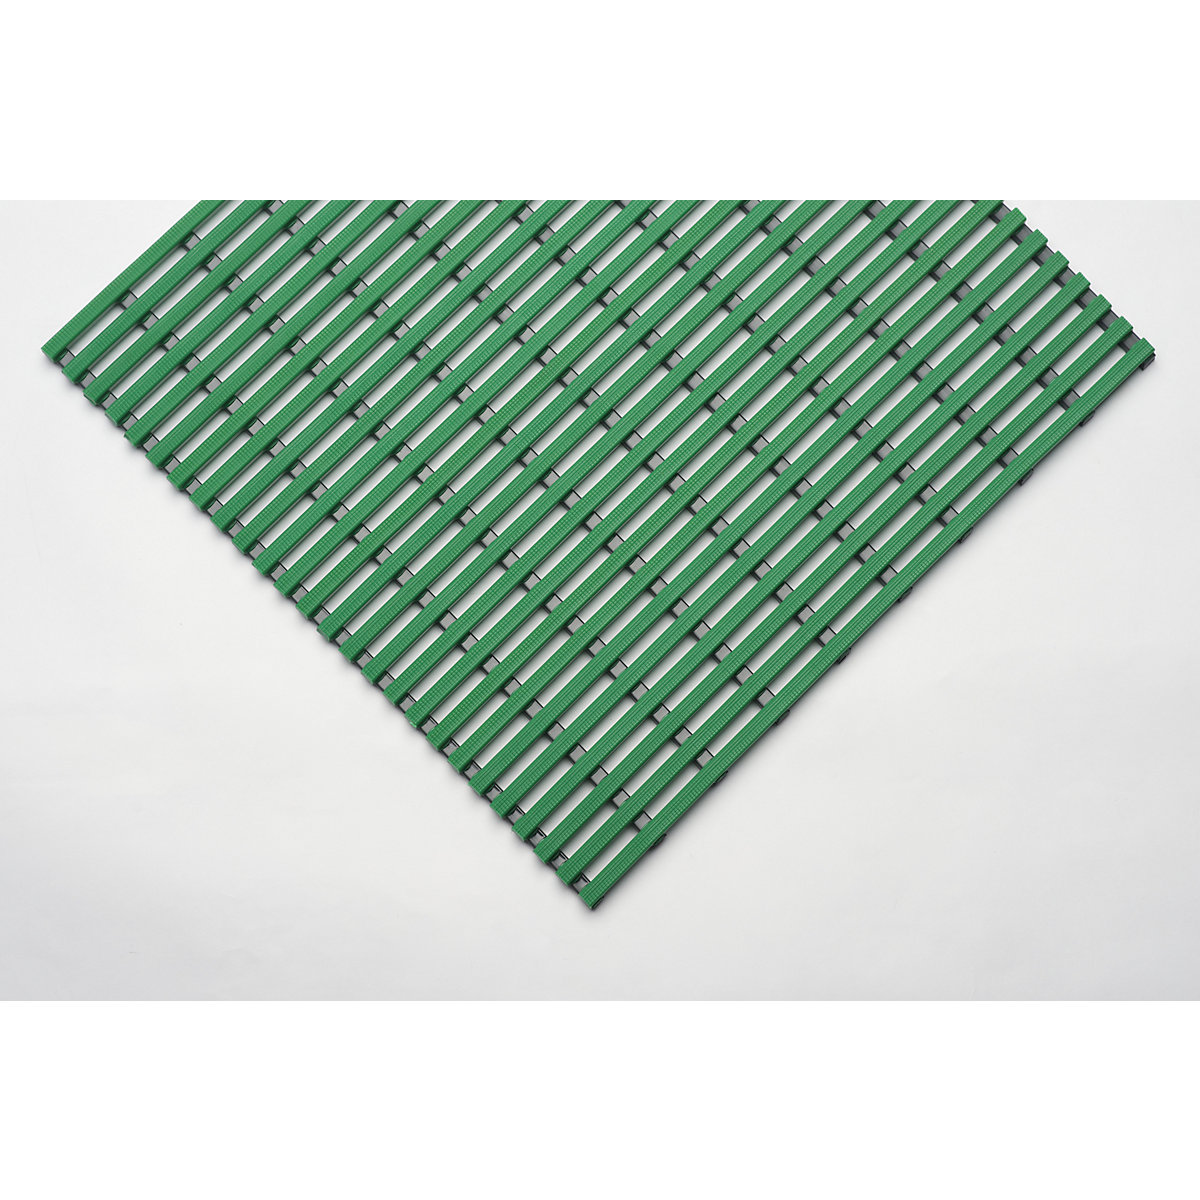 Floor mat for showers and changing rooms (Product illustration 18)